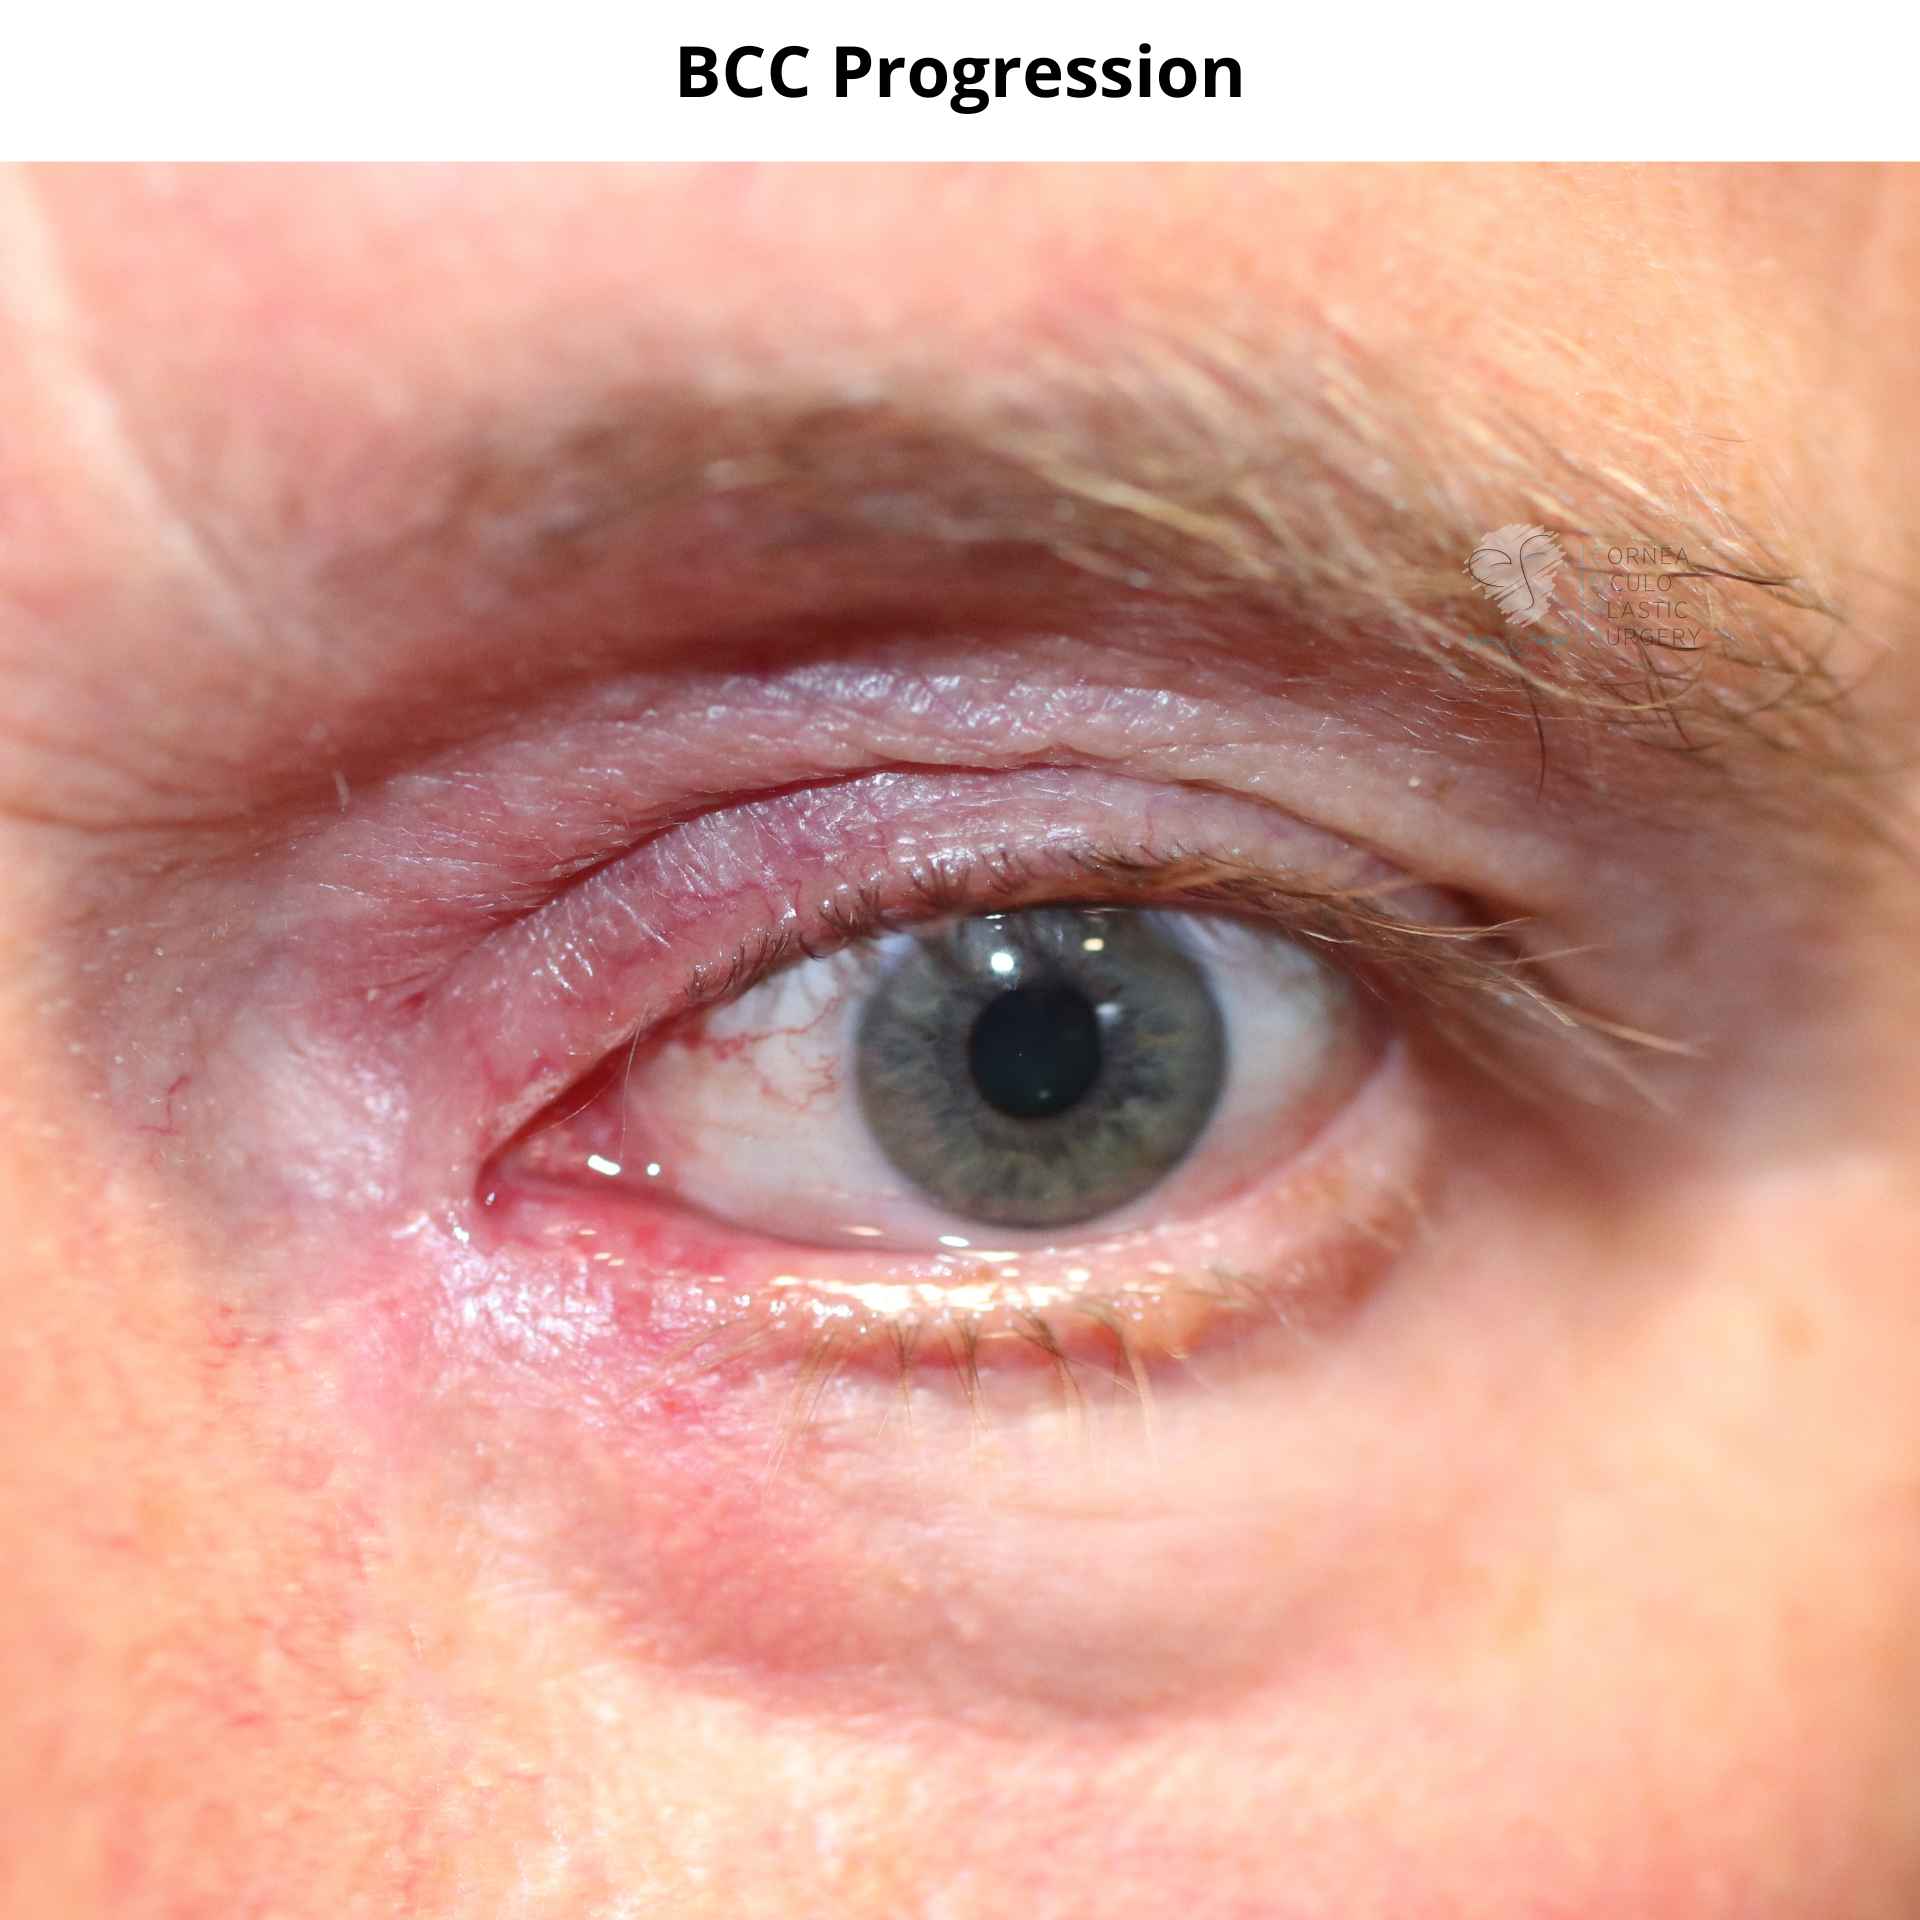 Patients BCC progression - this is a before photo from 2 years ago.